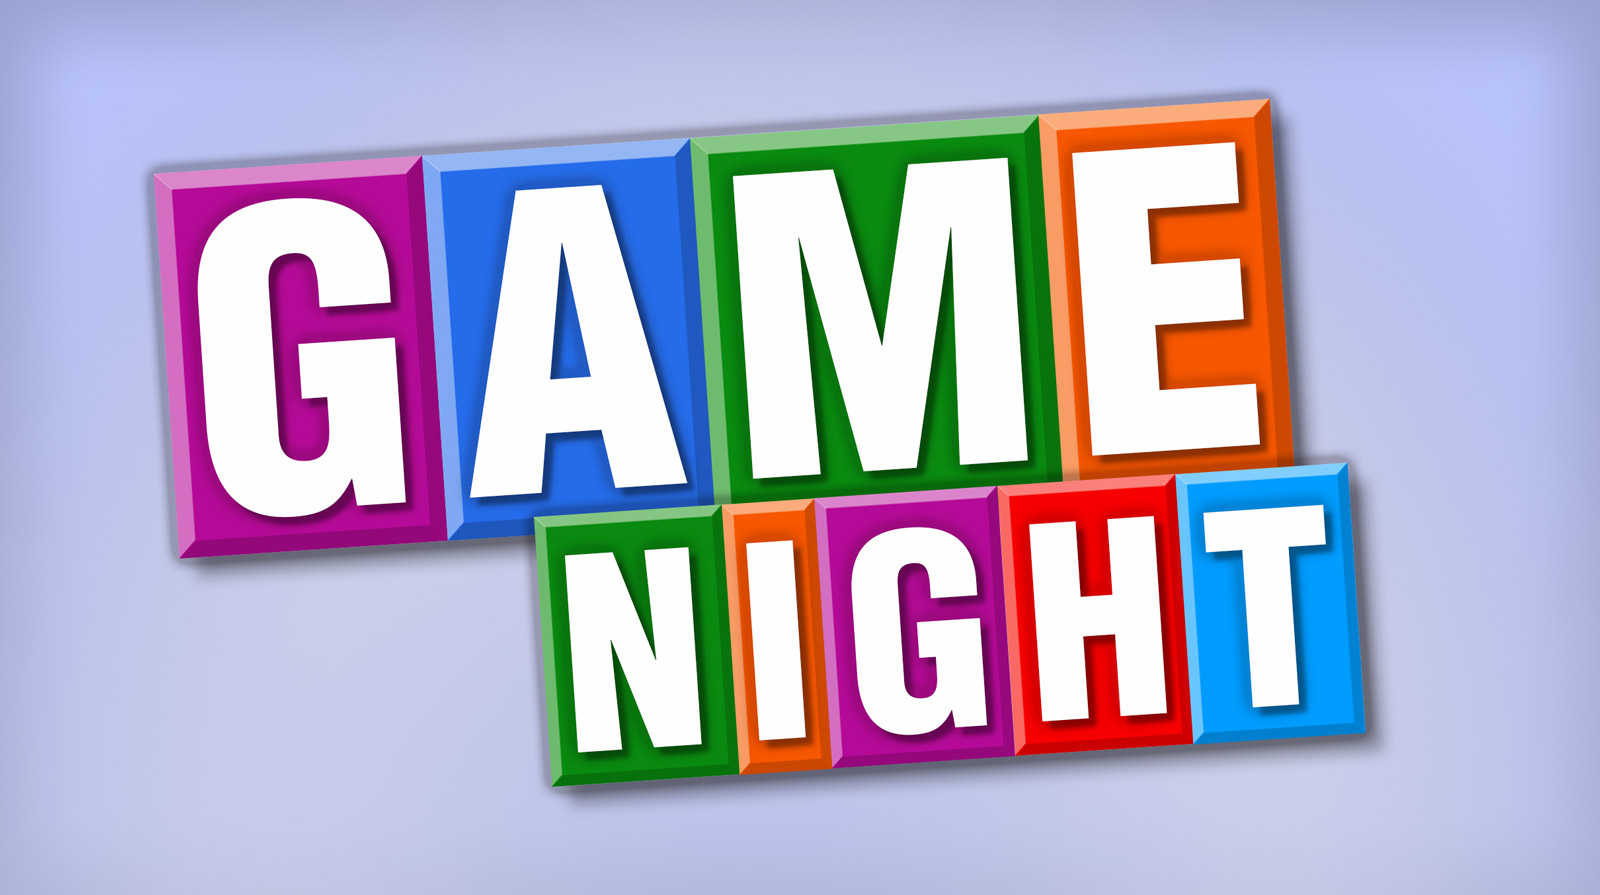 Image of the words "game night" spelled out in bold letters with colorful blocks around the letters.